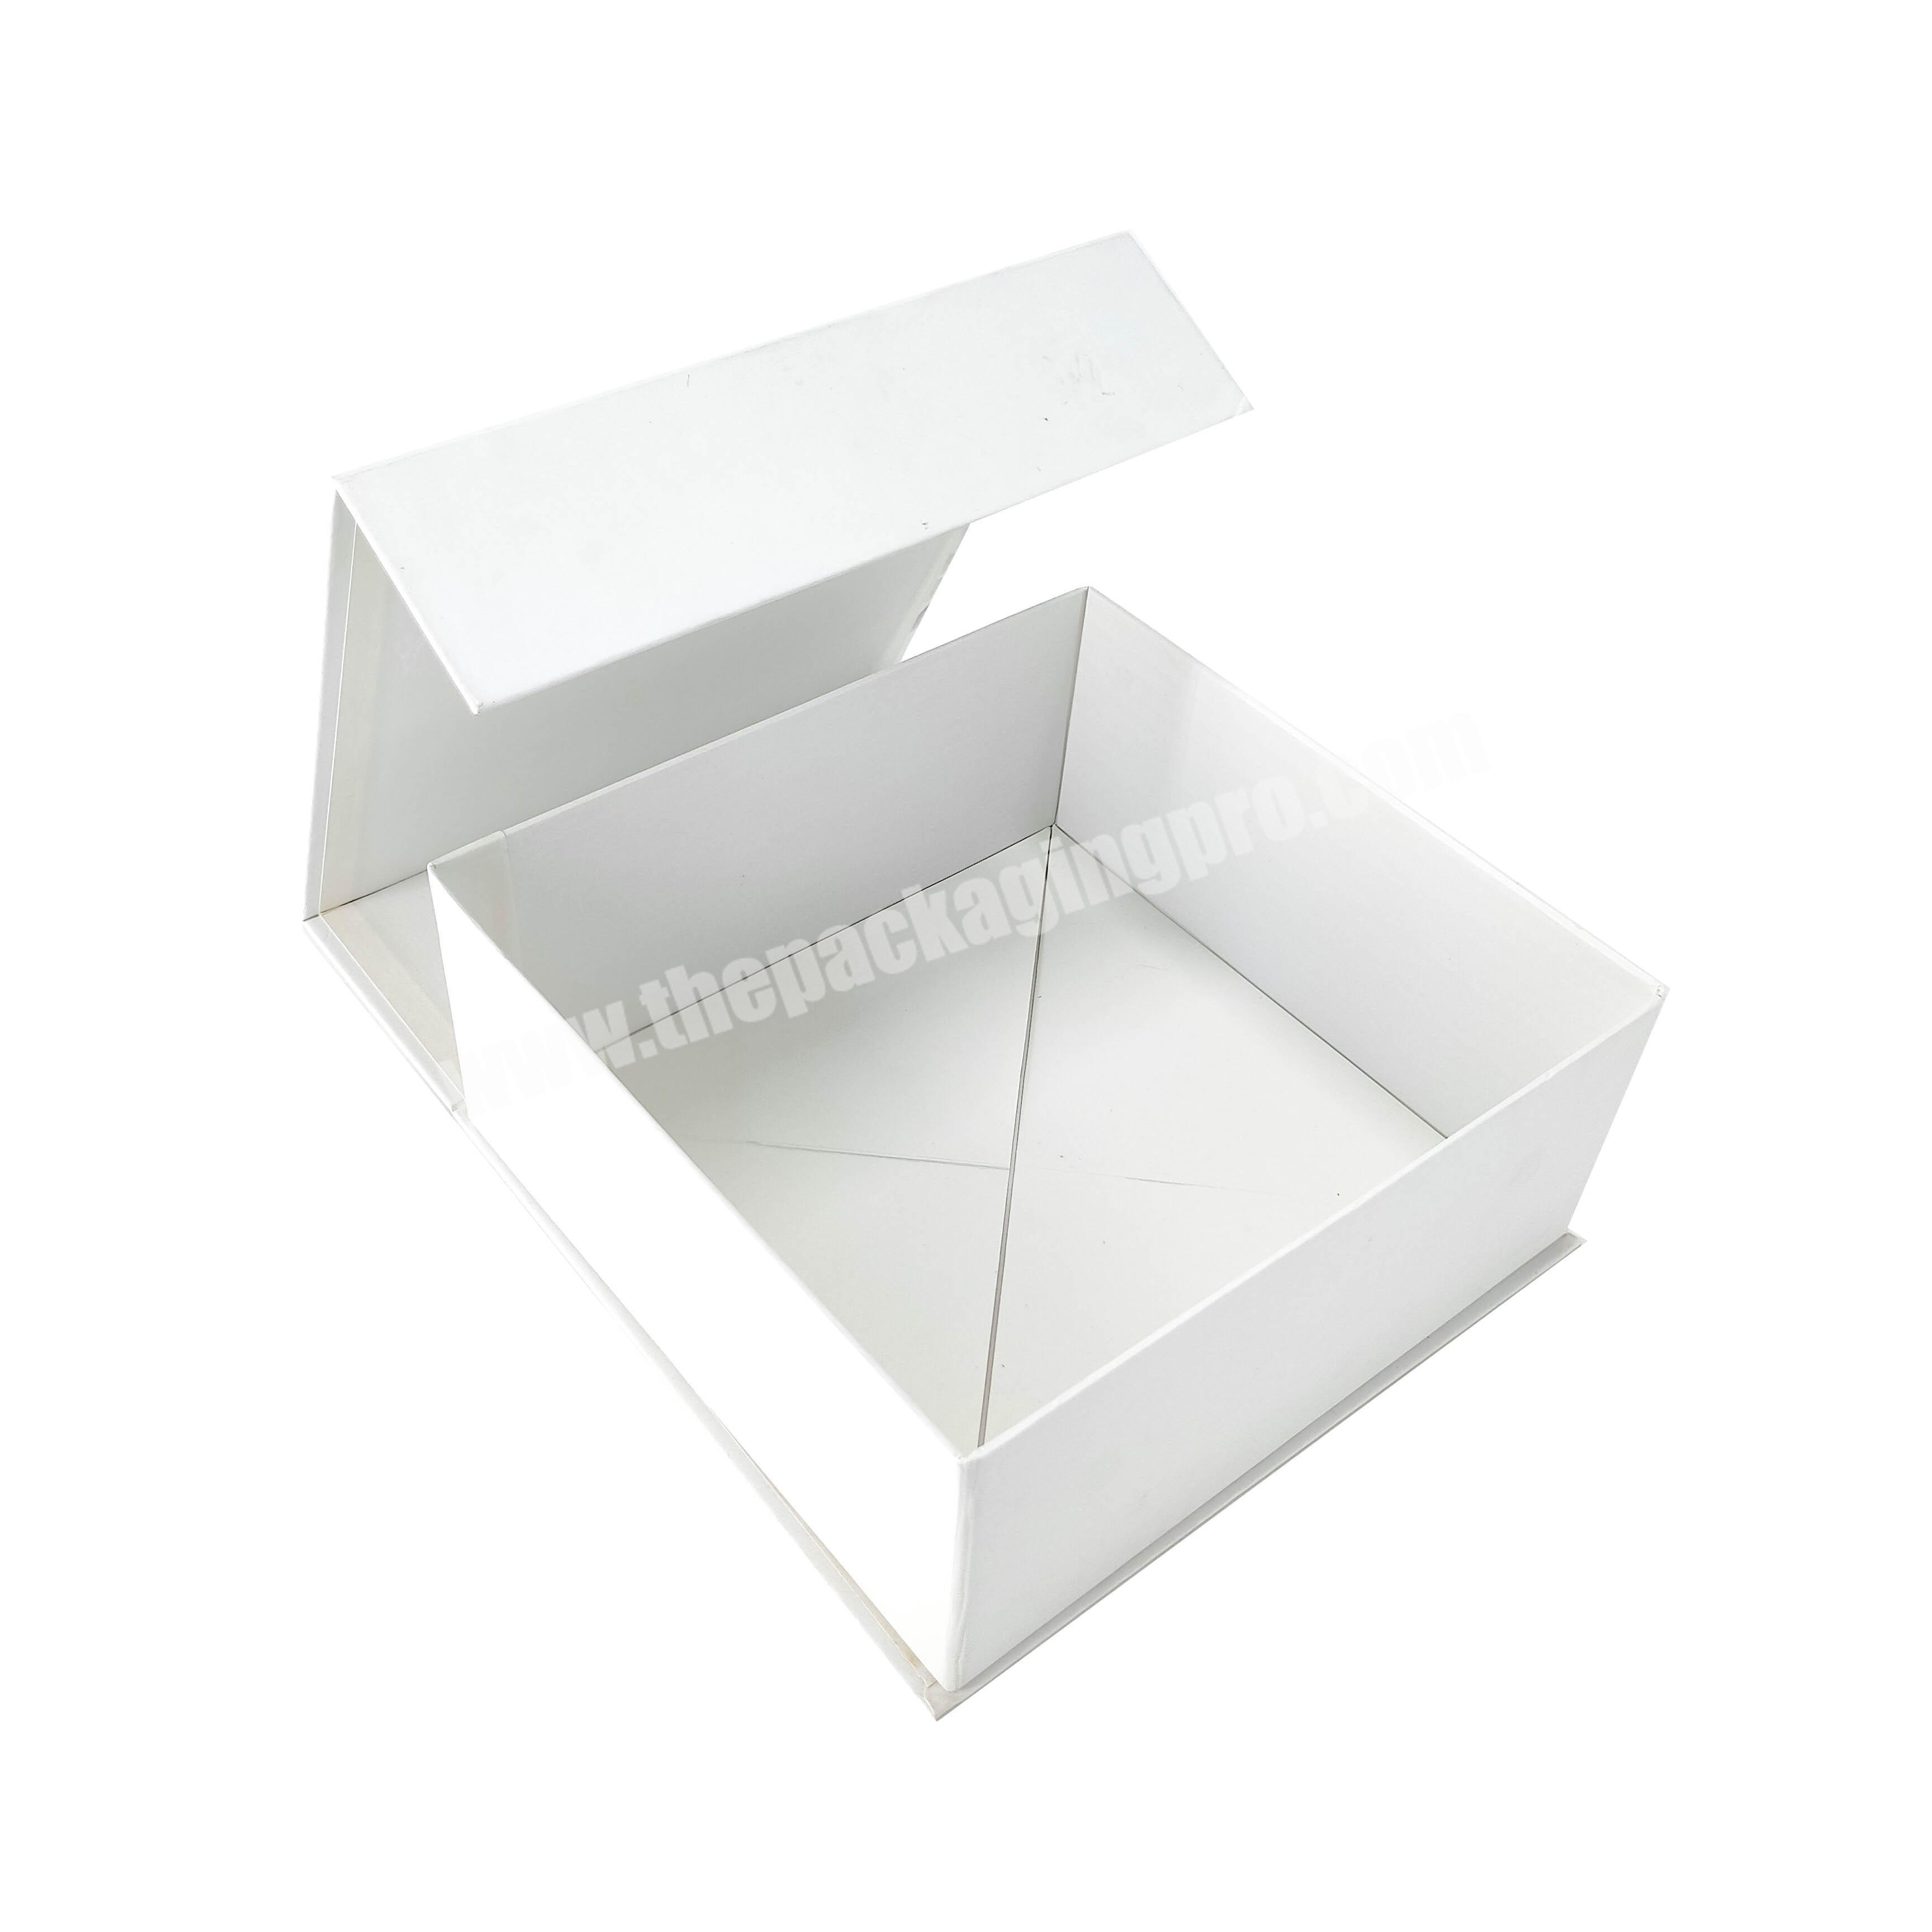 magnetic gift box white package box box packaging design